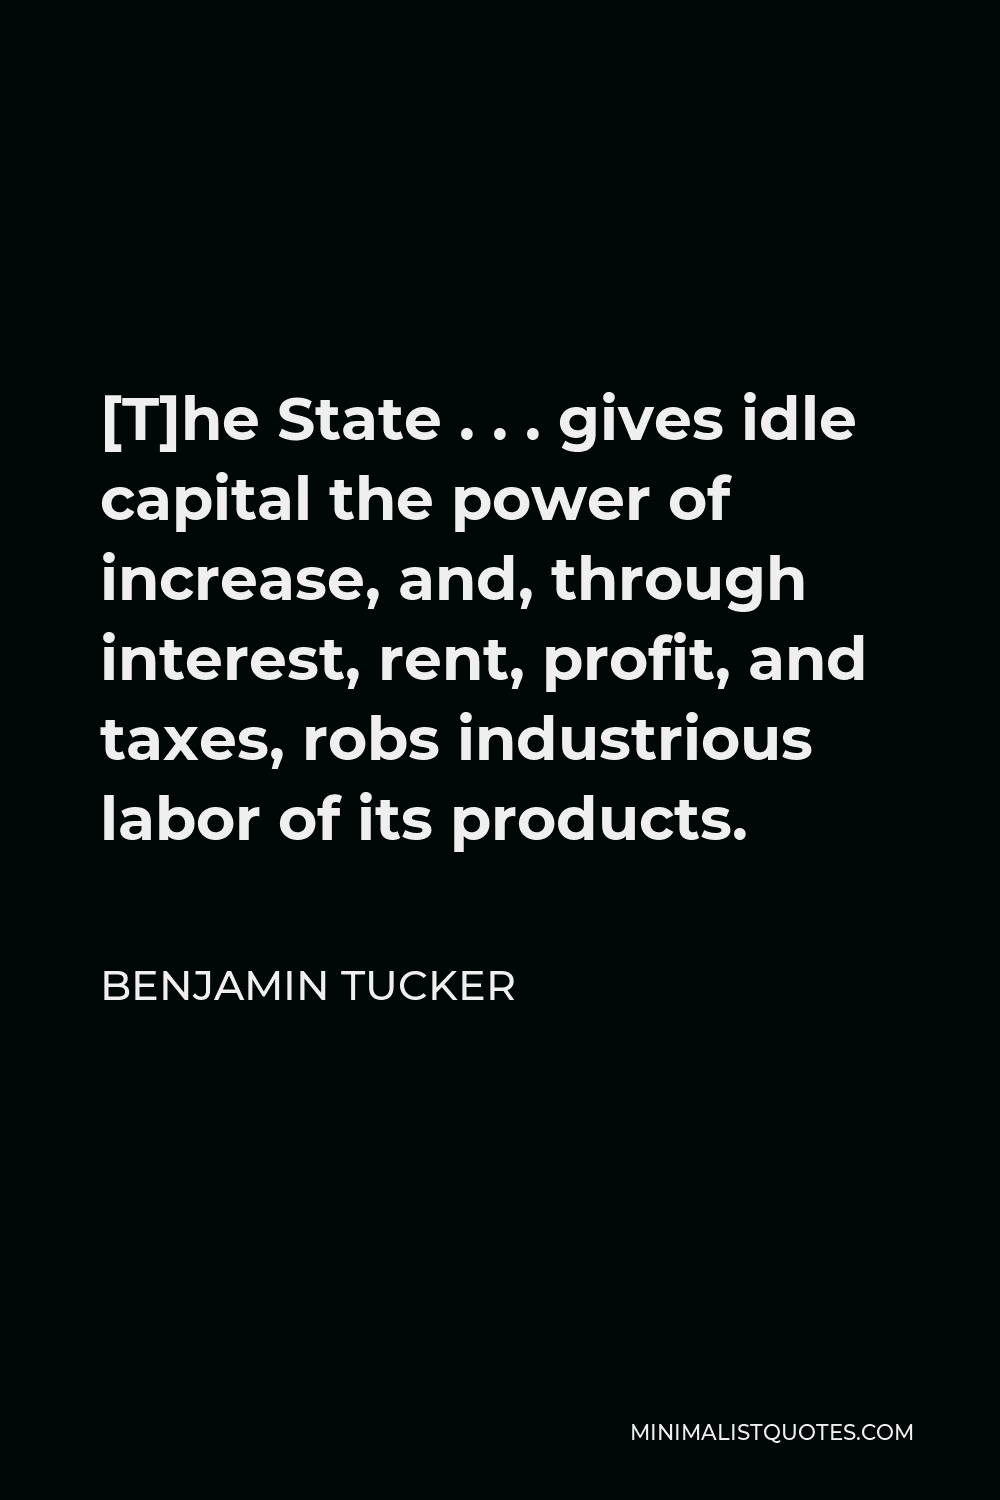 Benjamin Tucker Quote - [T]he State . . . gives idle capital the power of increase, and, through interest, rent, profit, and taxes, robs industrious labor of its products.